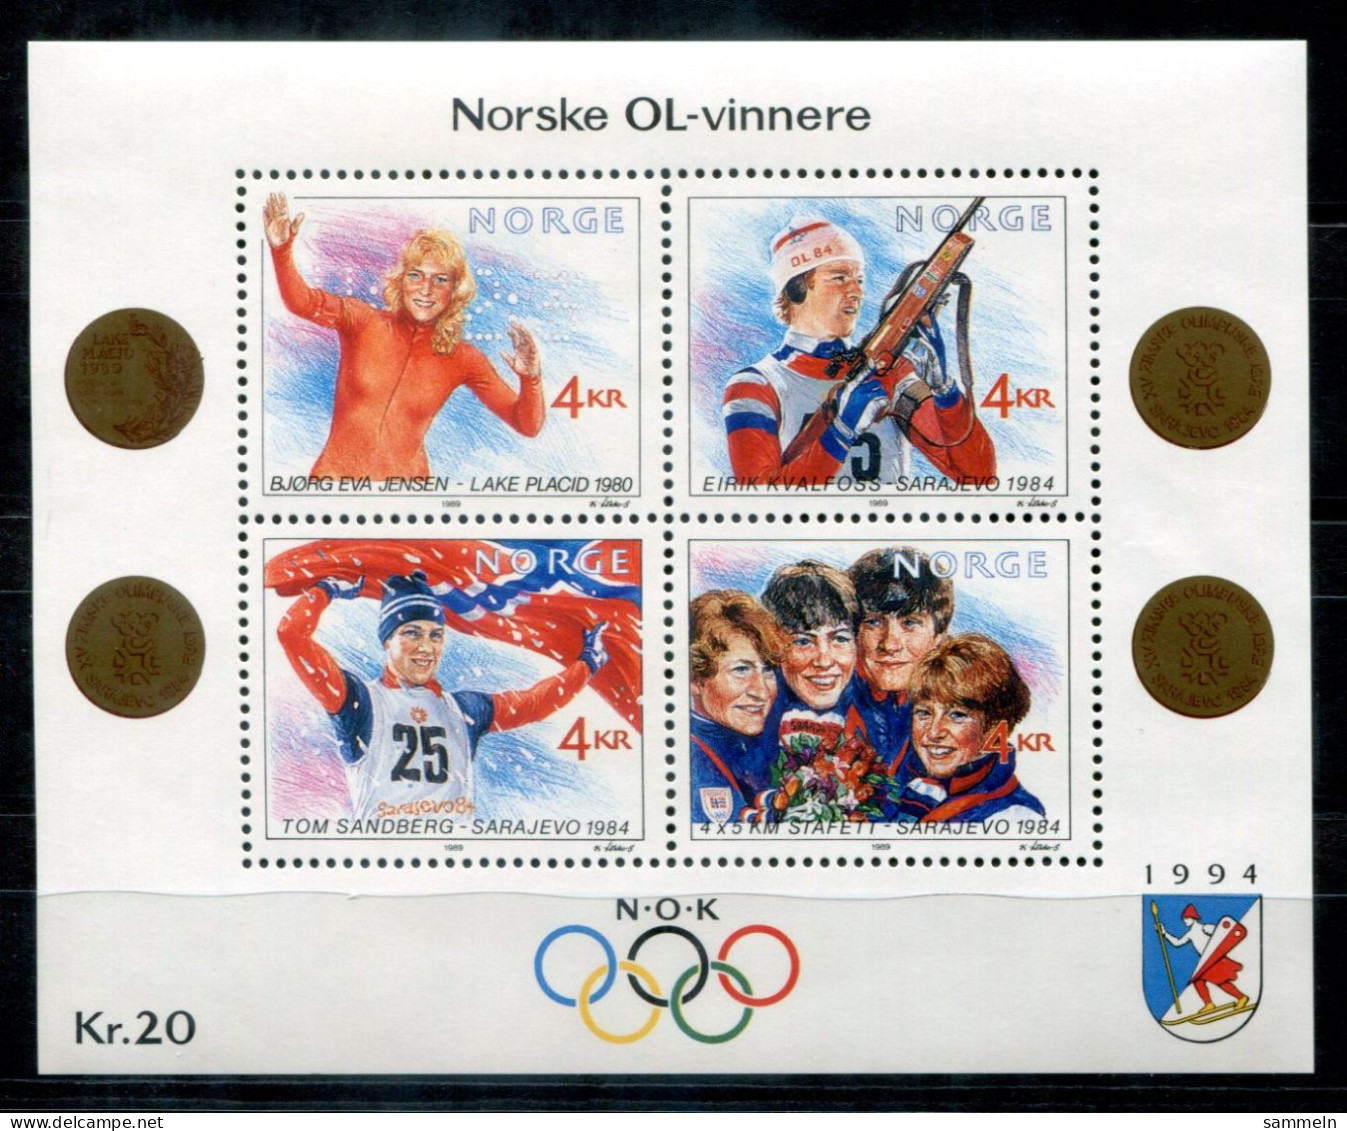 NORWEGEN Block 12, Bl.12 Mnh - Olympiasieger, Olympic Champions Olympique - NORWAY / NORVÈGE - Blocs-feuillets